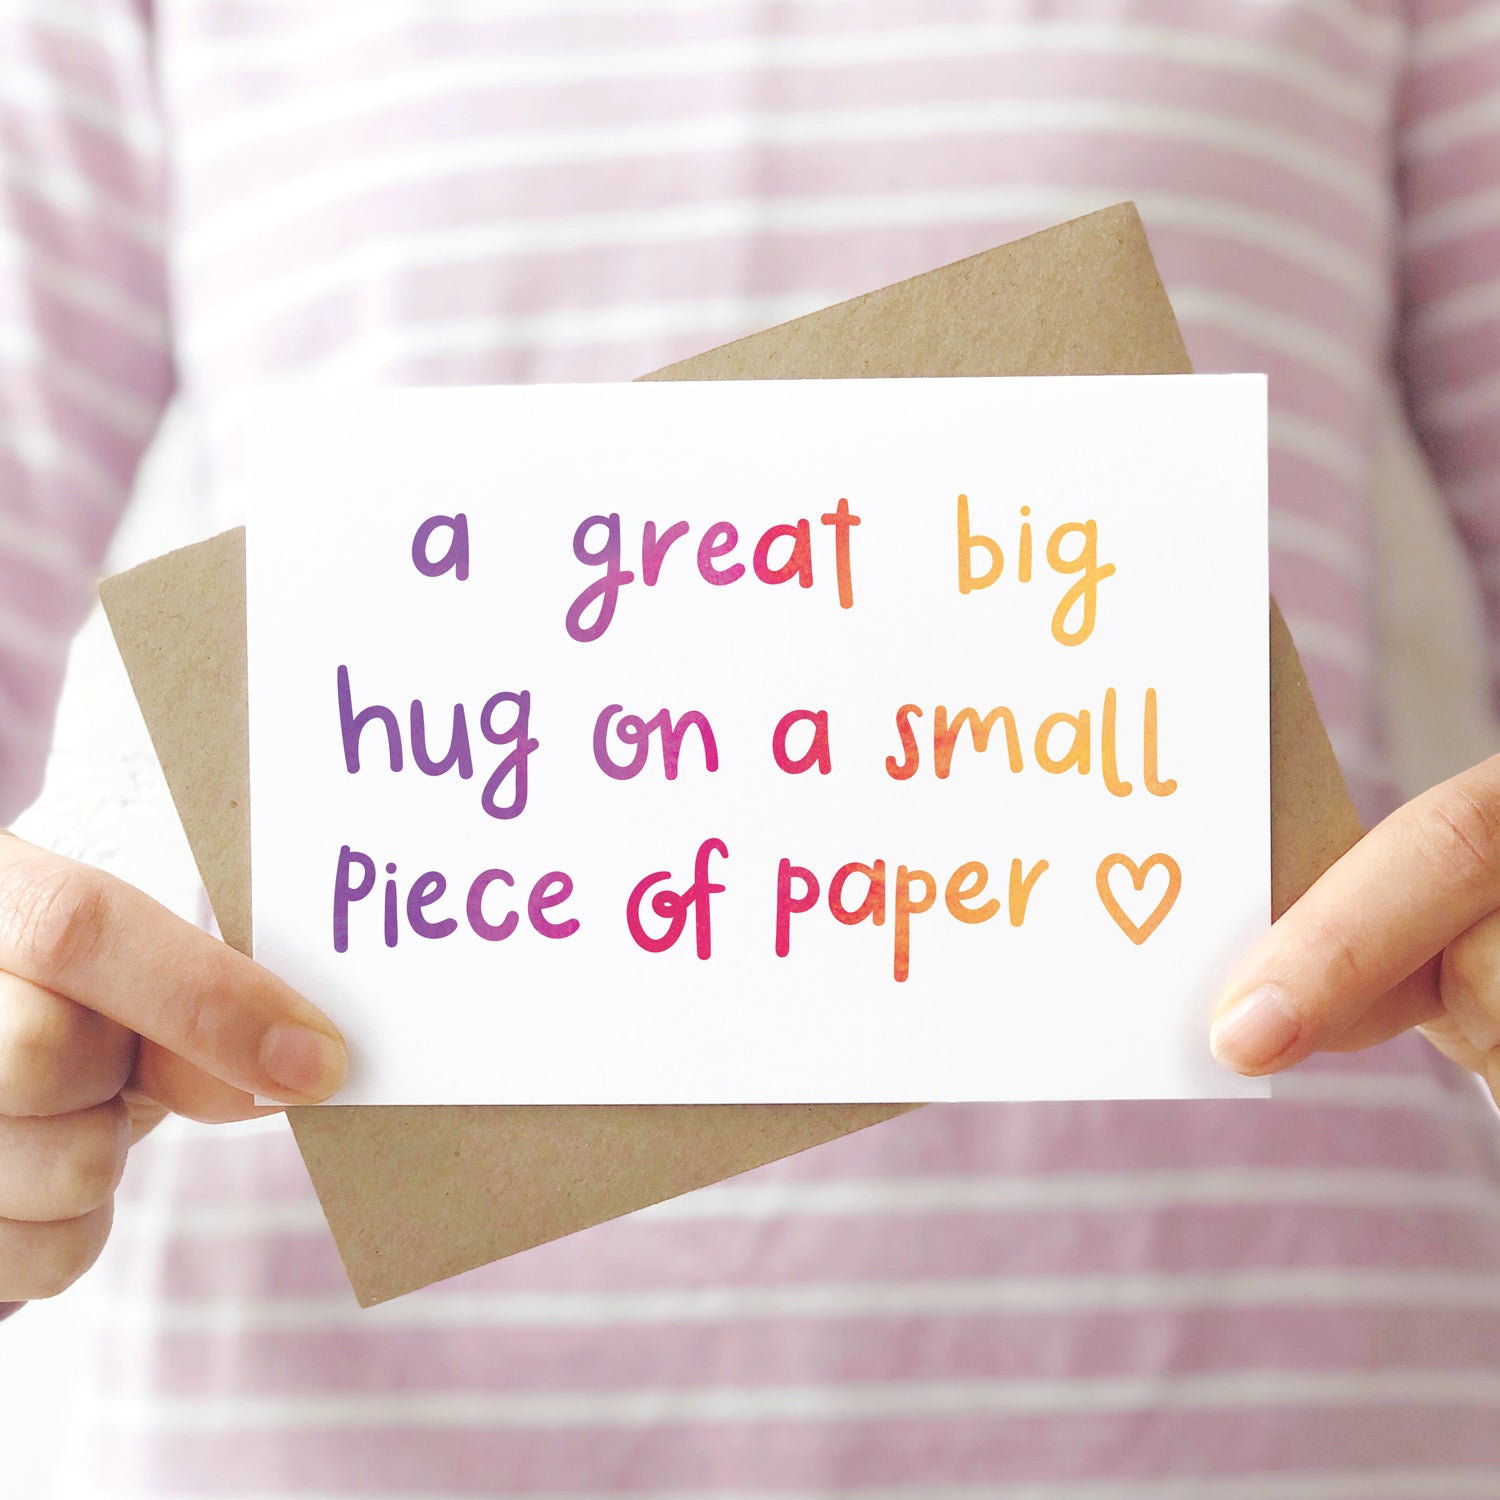 A great big hug on a small piece of paper card photographed being held in front of a pink stripey shirt.